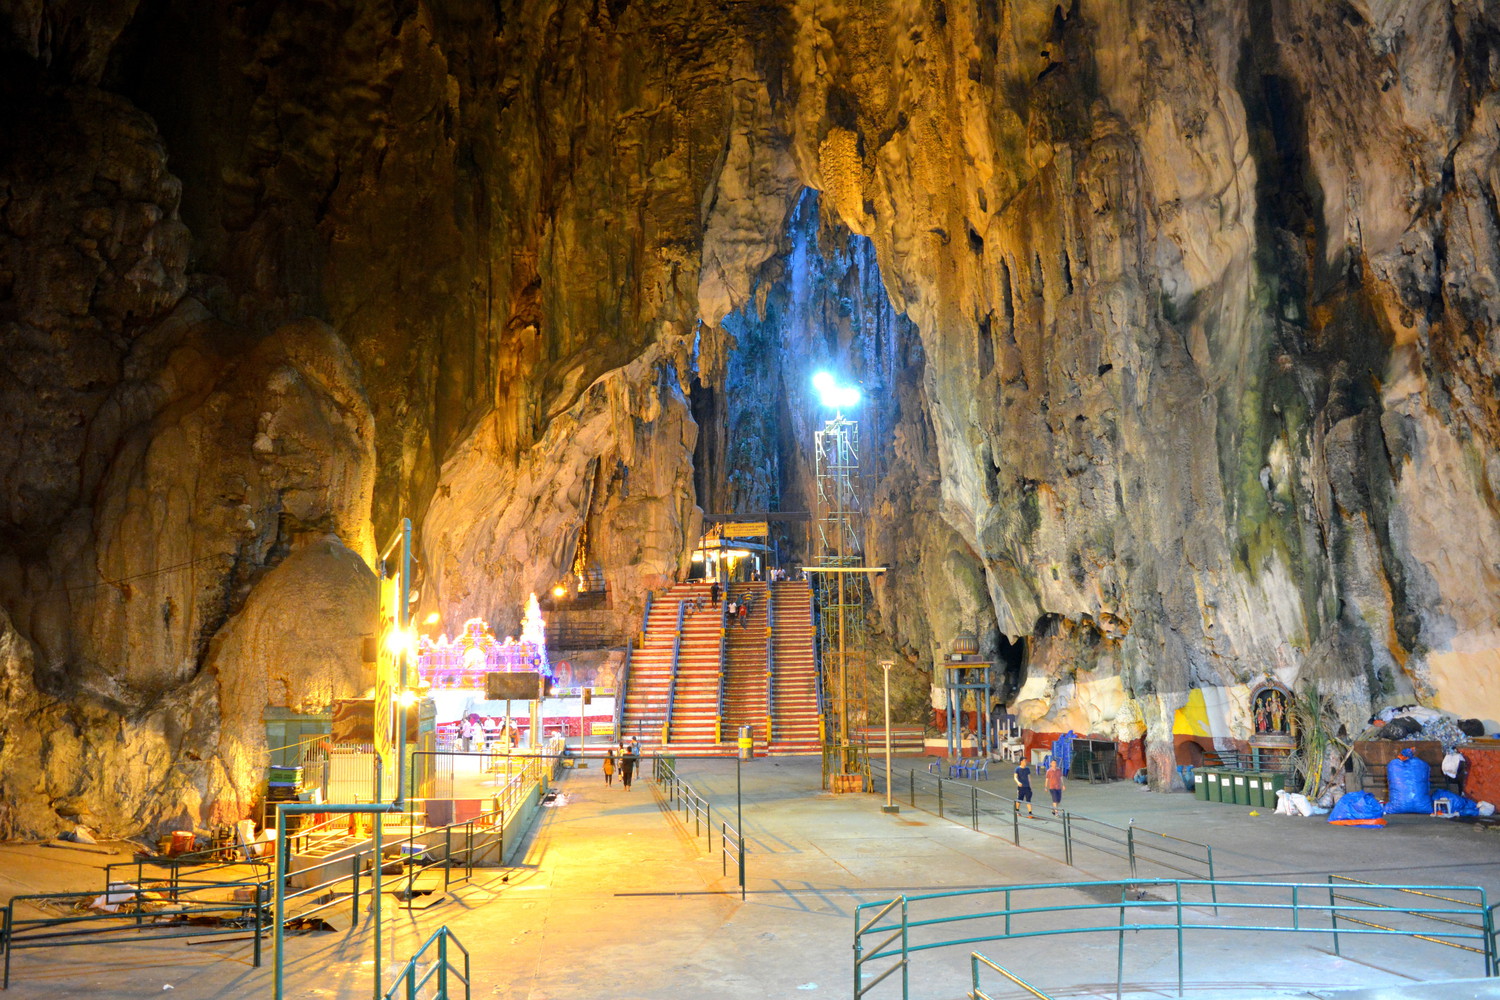 Interior of Batu Caves with limestone formations